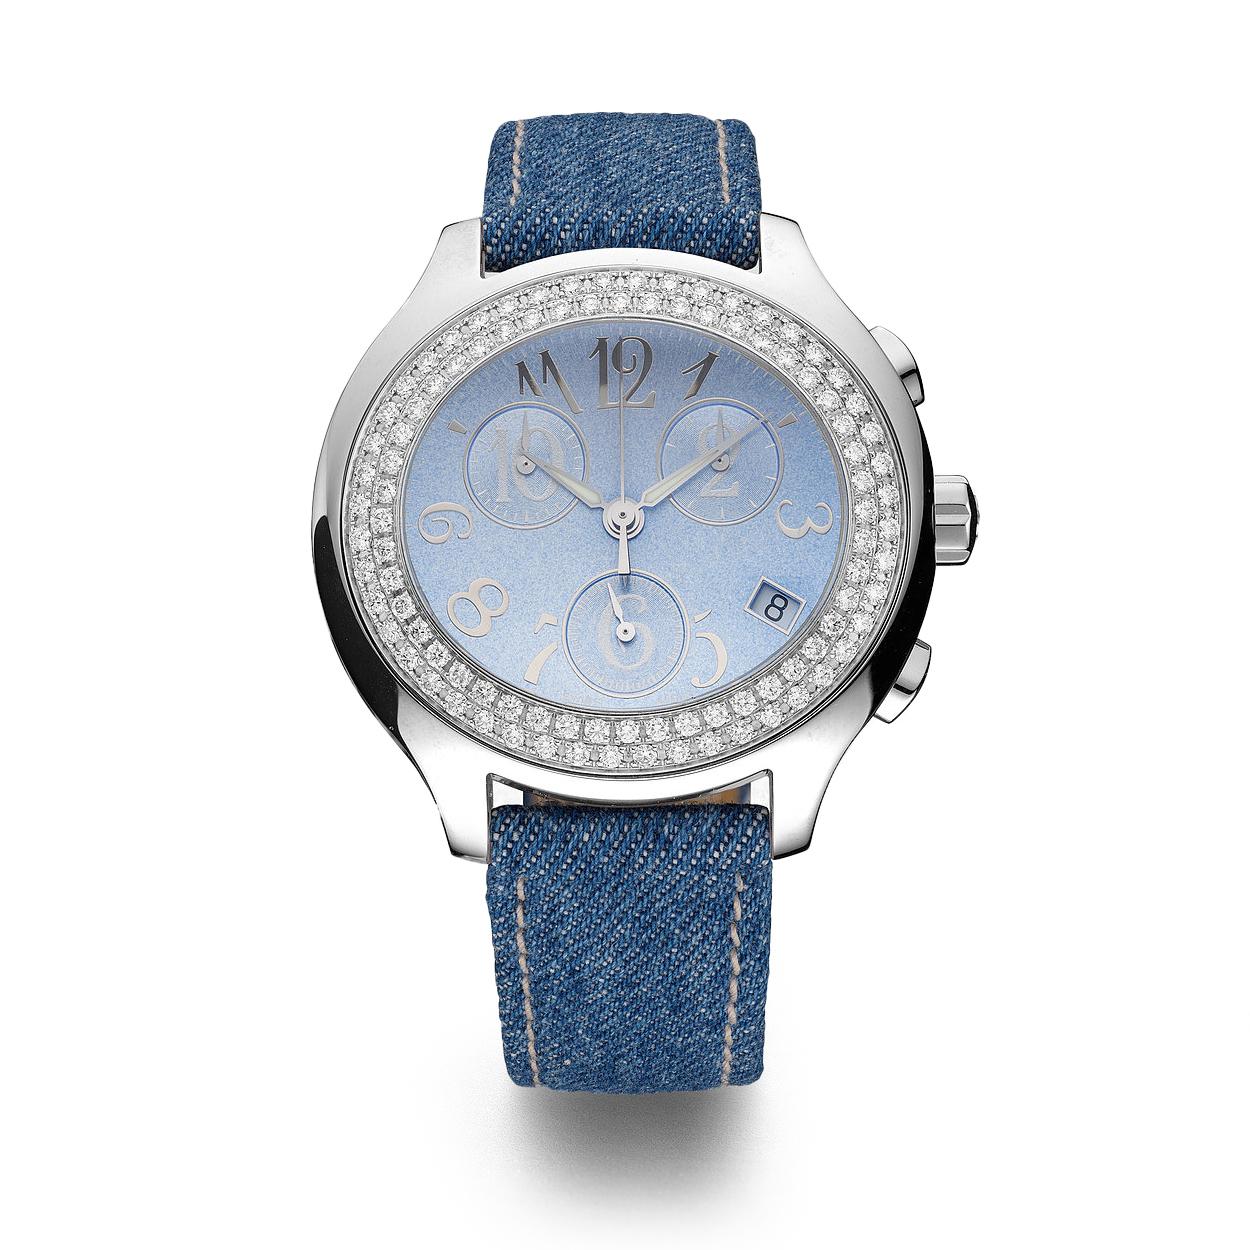 Chronograph watch in steel bezel set with 96 diamonds 1.88 cts blue dial, prong buckle alligator strap quartz movement.            